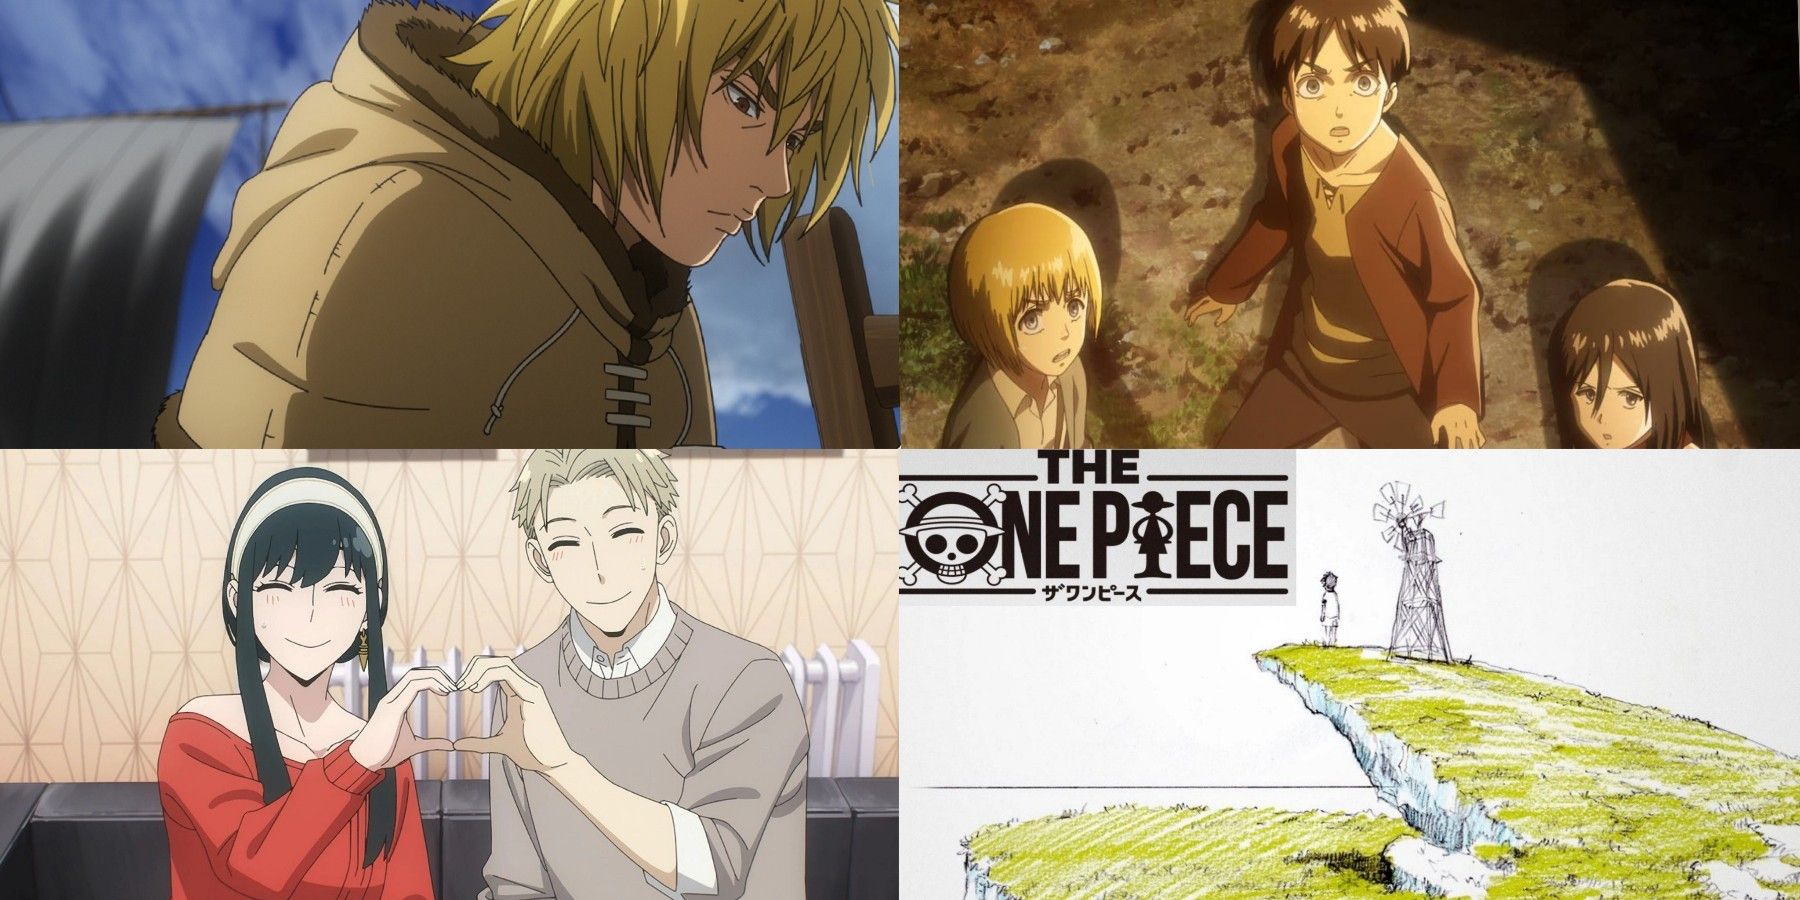 Vinland Saga robbed says Angry fans: Why did it not win any Anime awards?